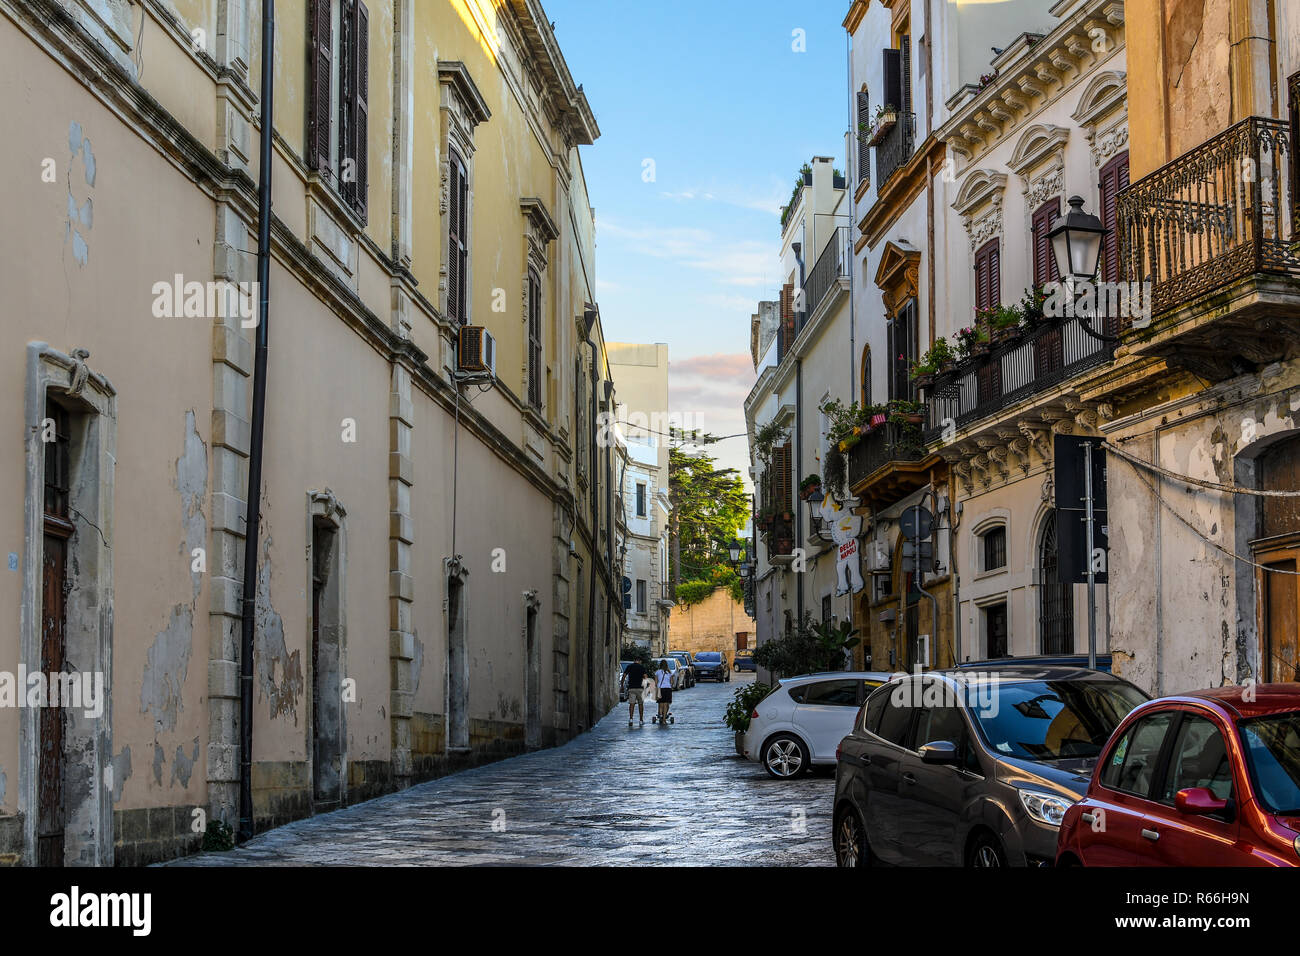 A young couple push a baby stroller down a narrow, dark alley past restaurants and apartments in the historic center of Brindisi, Italy Stock Photo